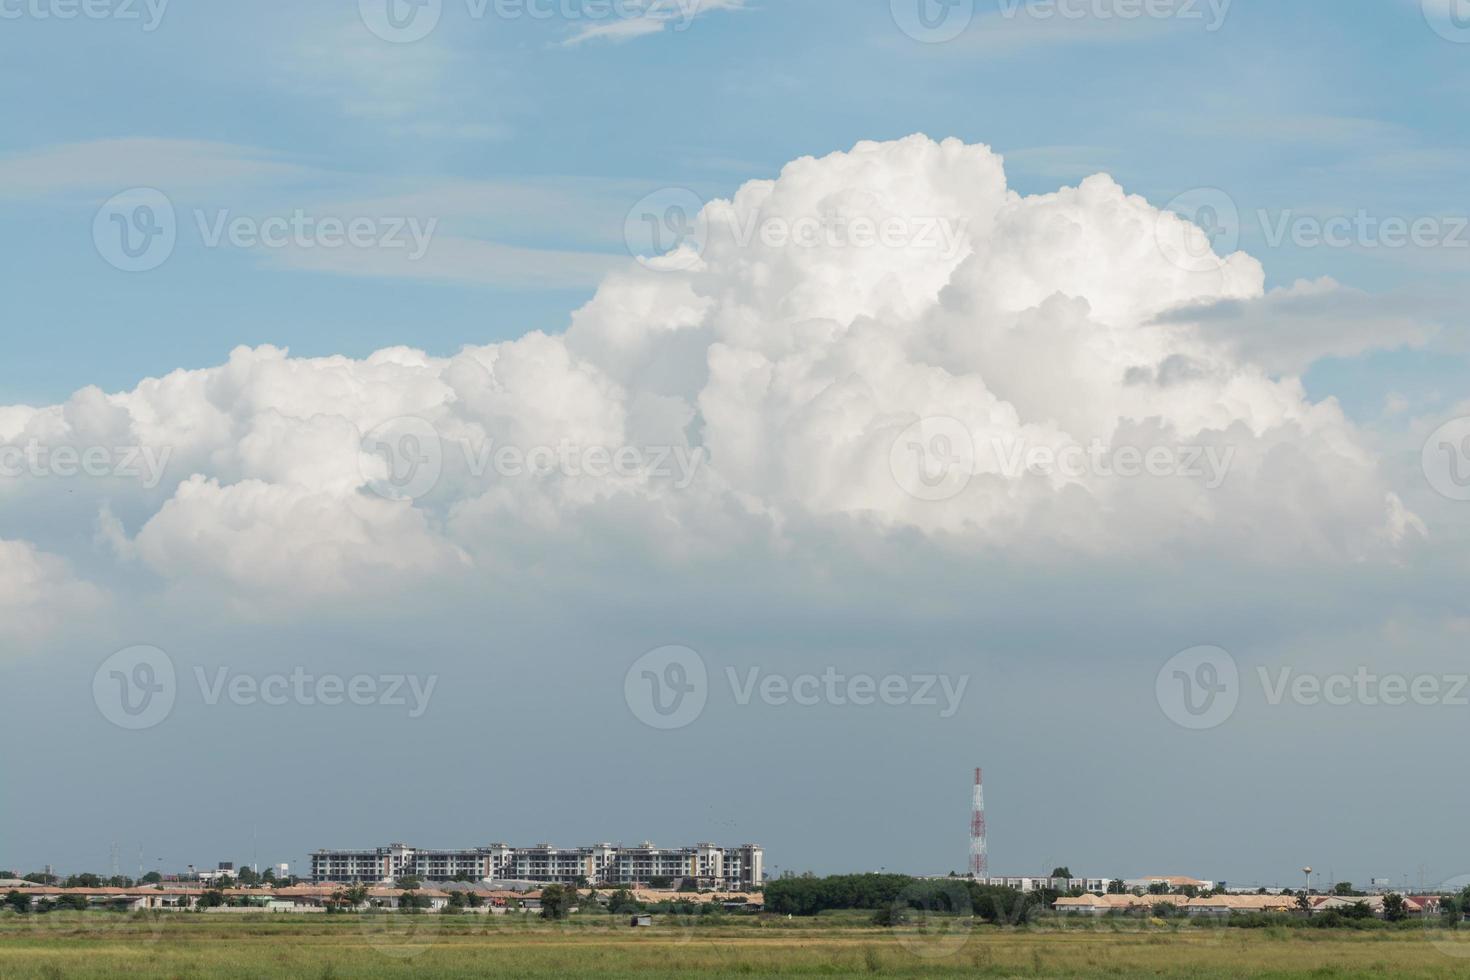 sky summer, cloudy background sunny air atmosphere photo